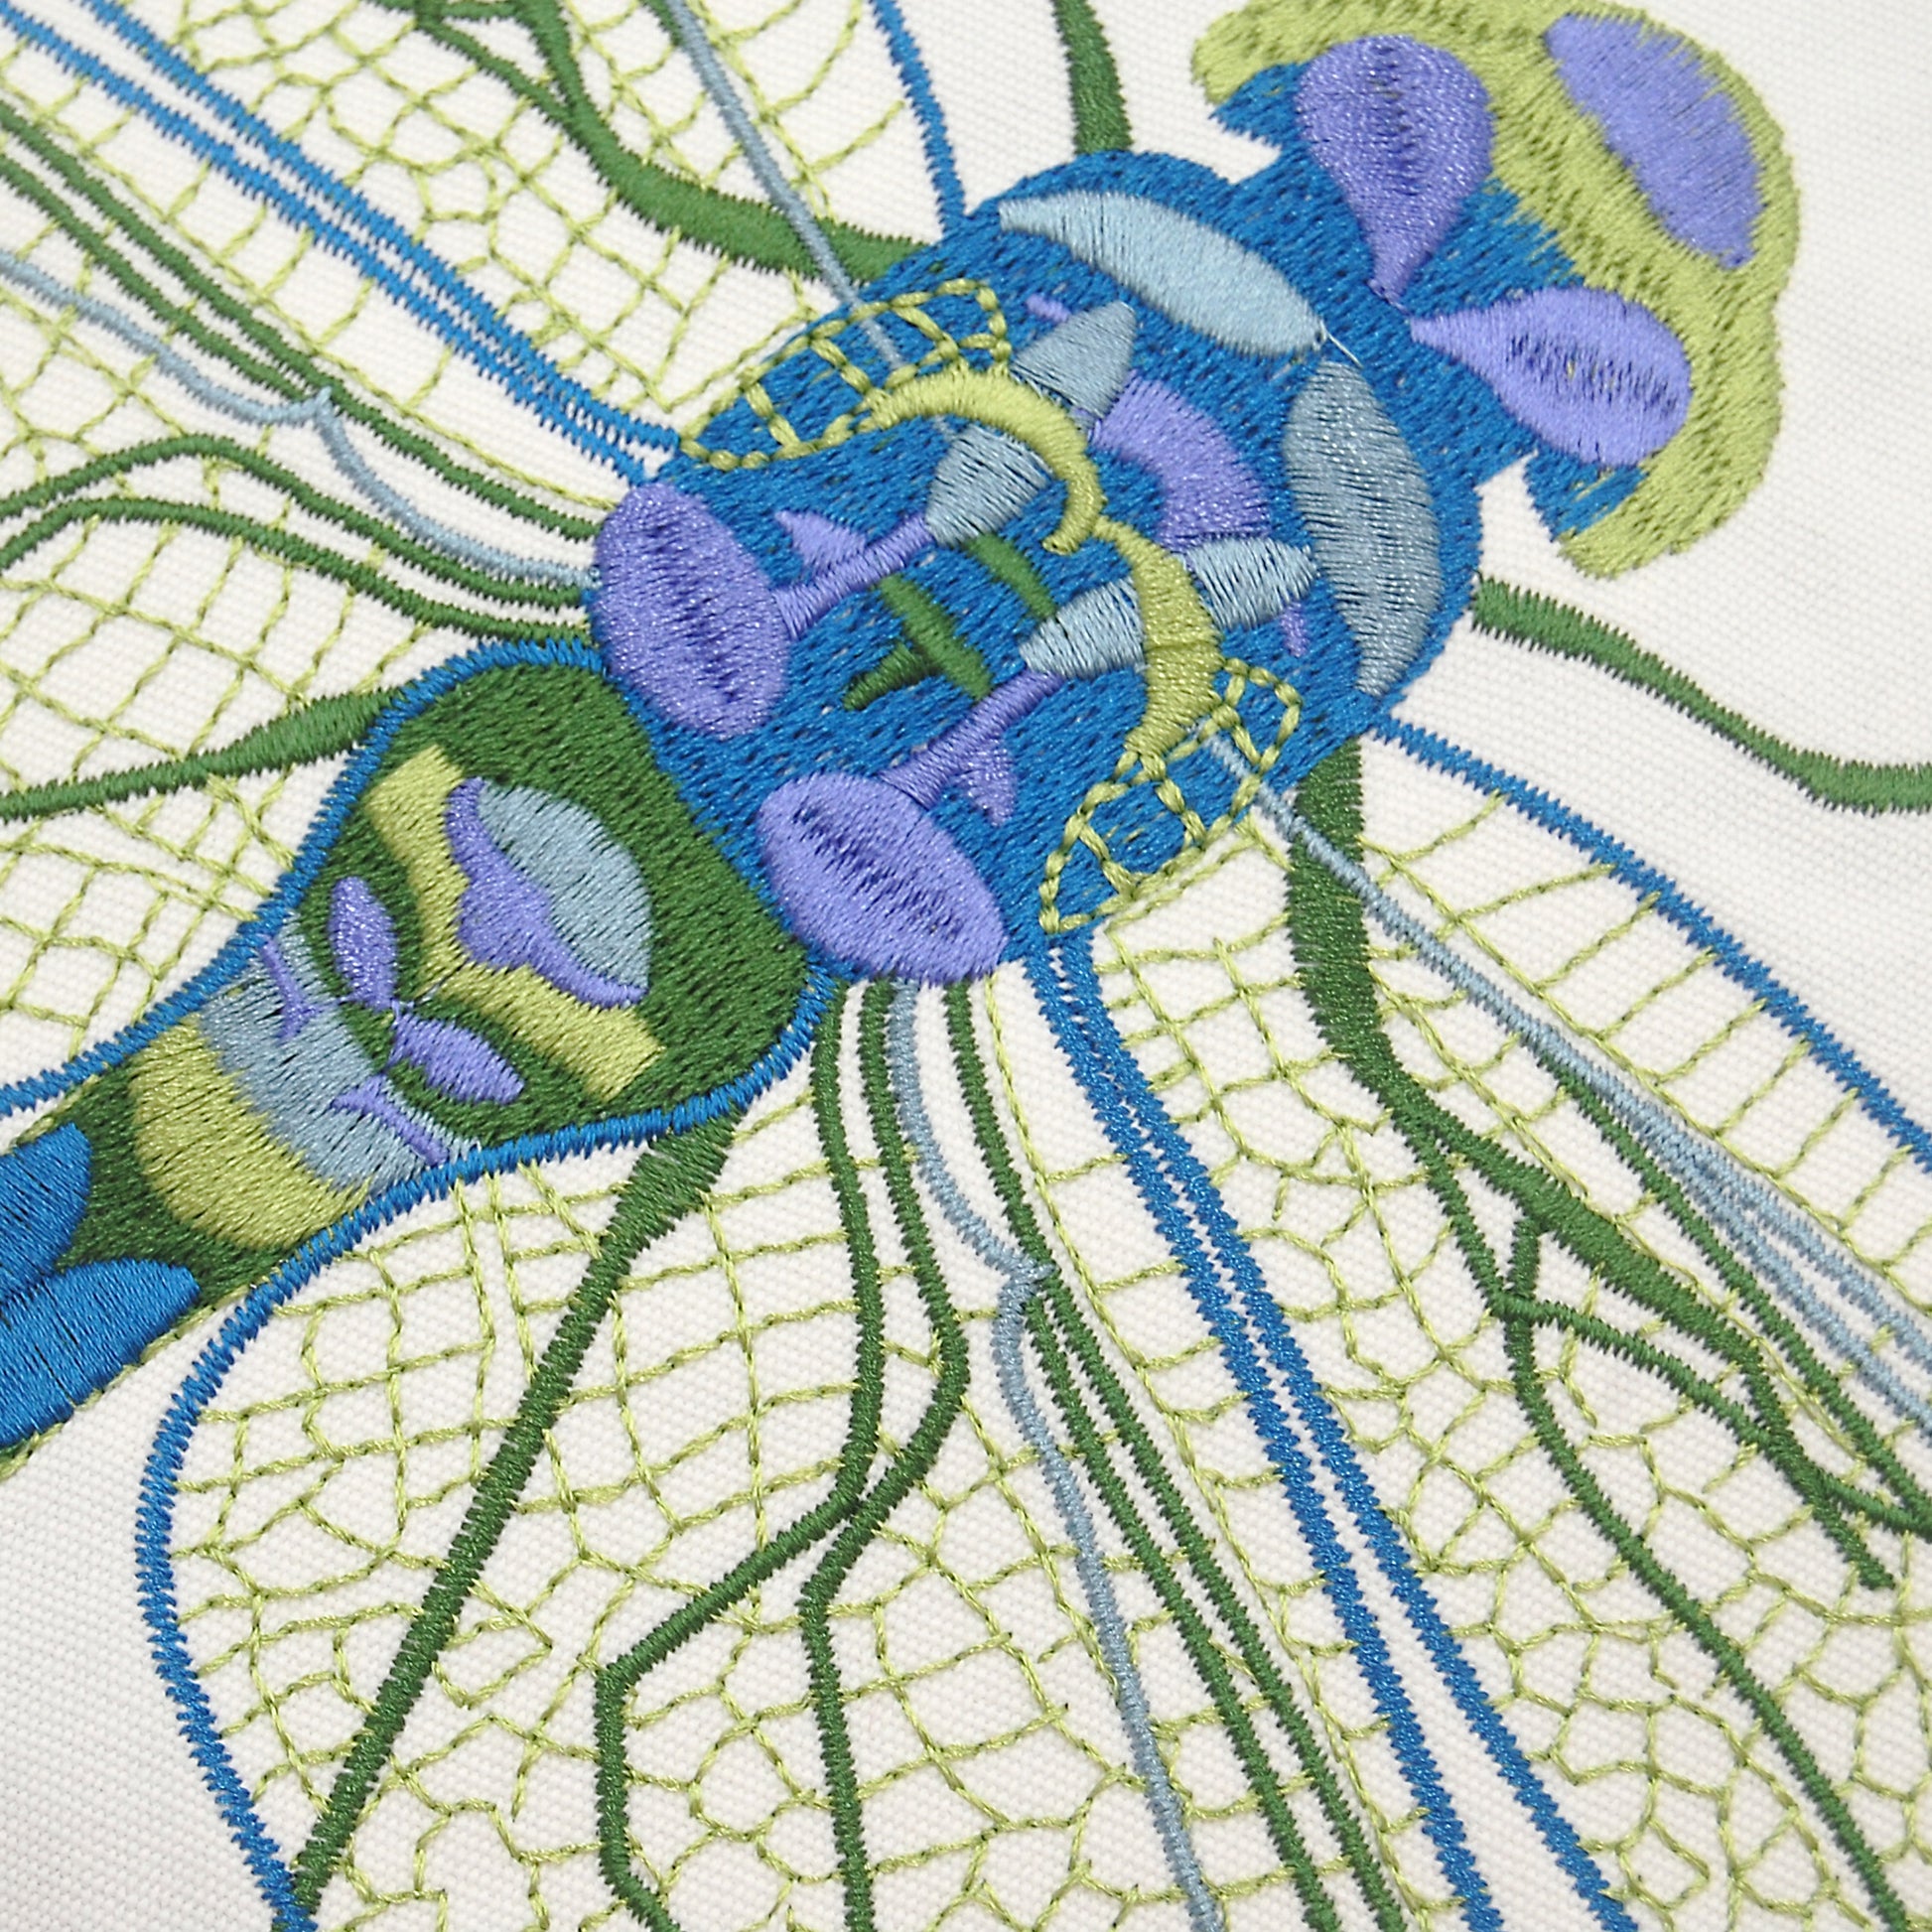 Detailed shot of the embroidery on the Blue Dragonfly Indoor Outdoor Pillow.